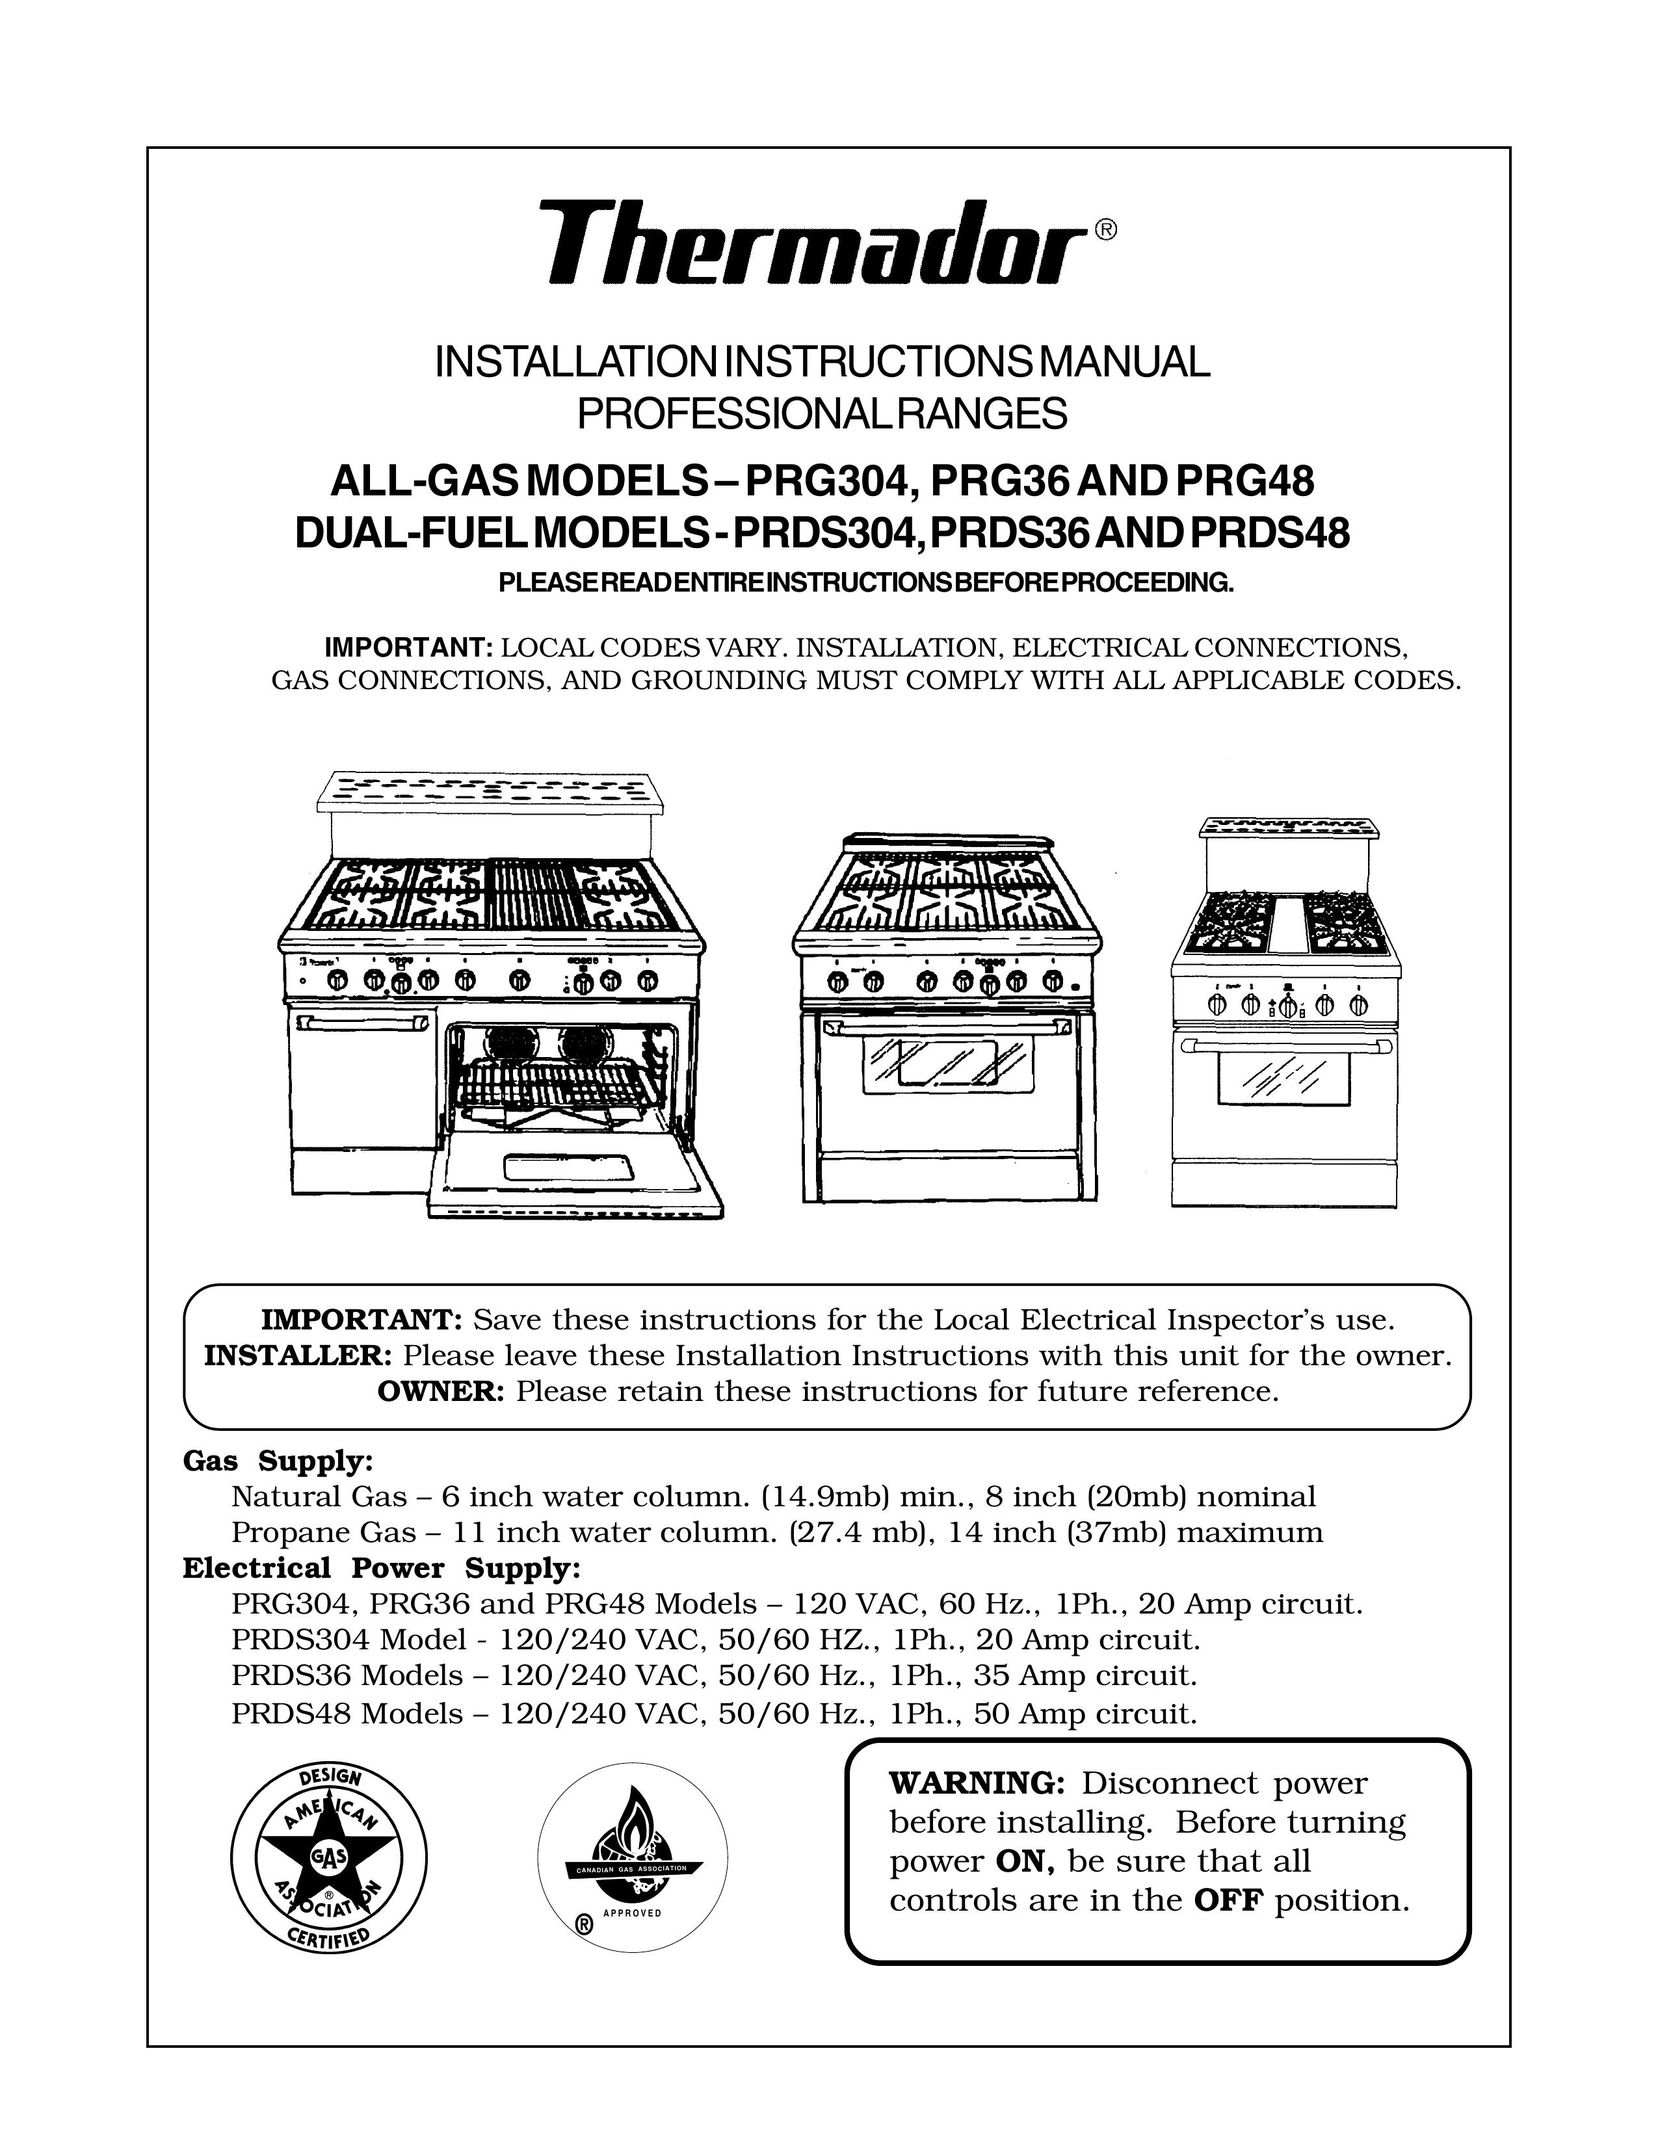 Thermador PRG304 Double Oven User Manual